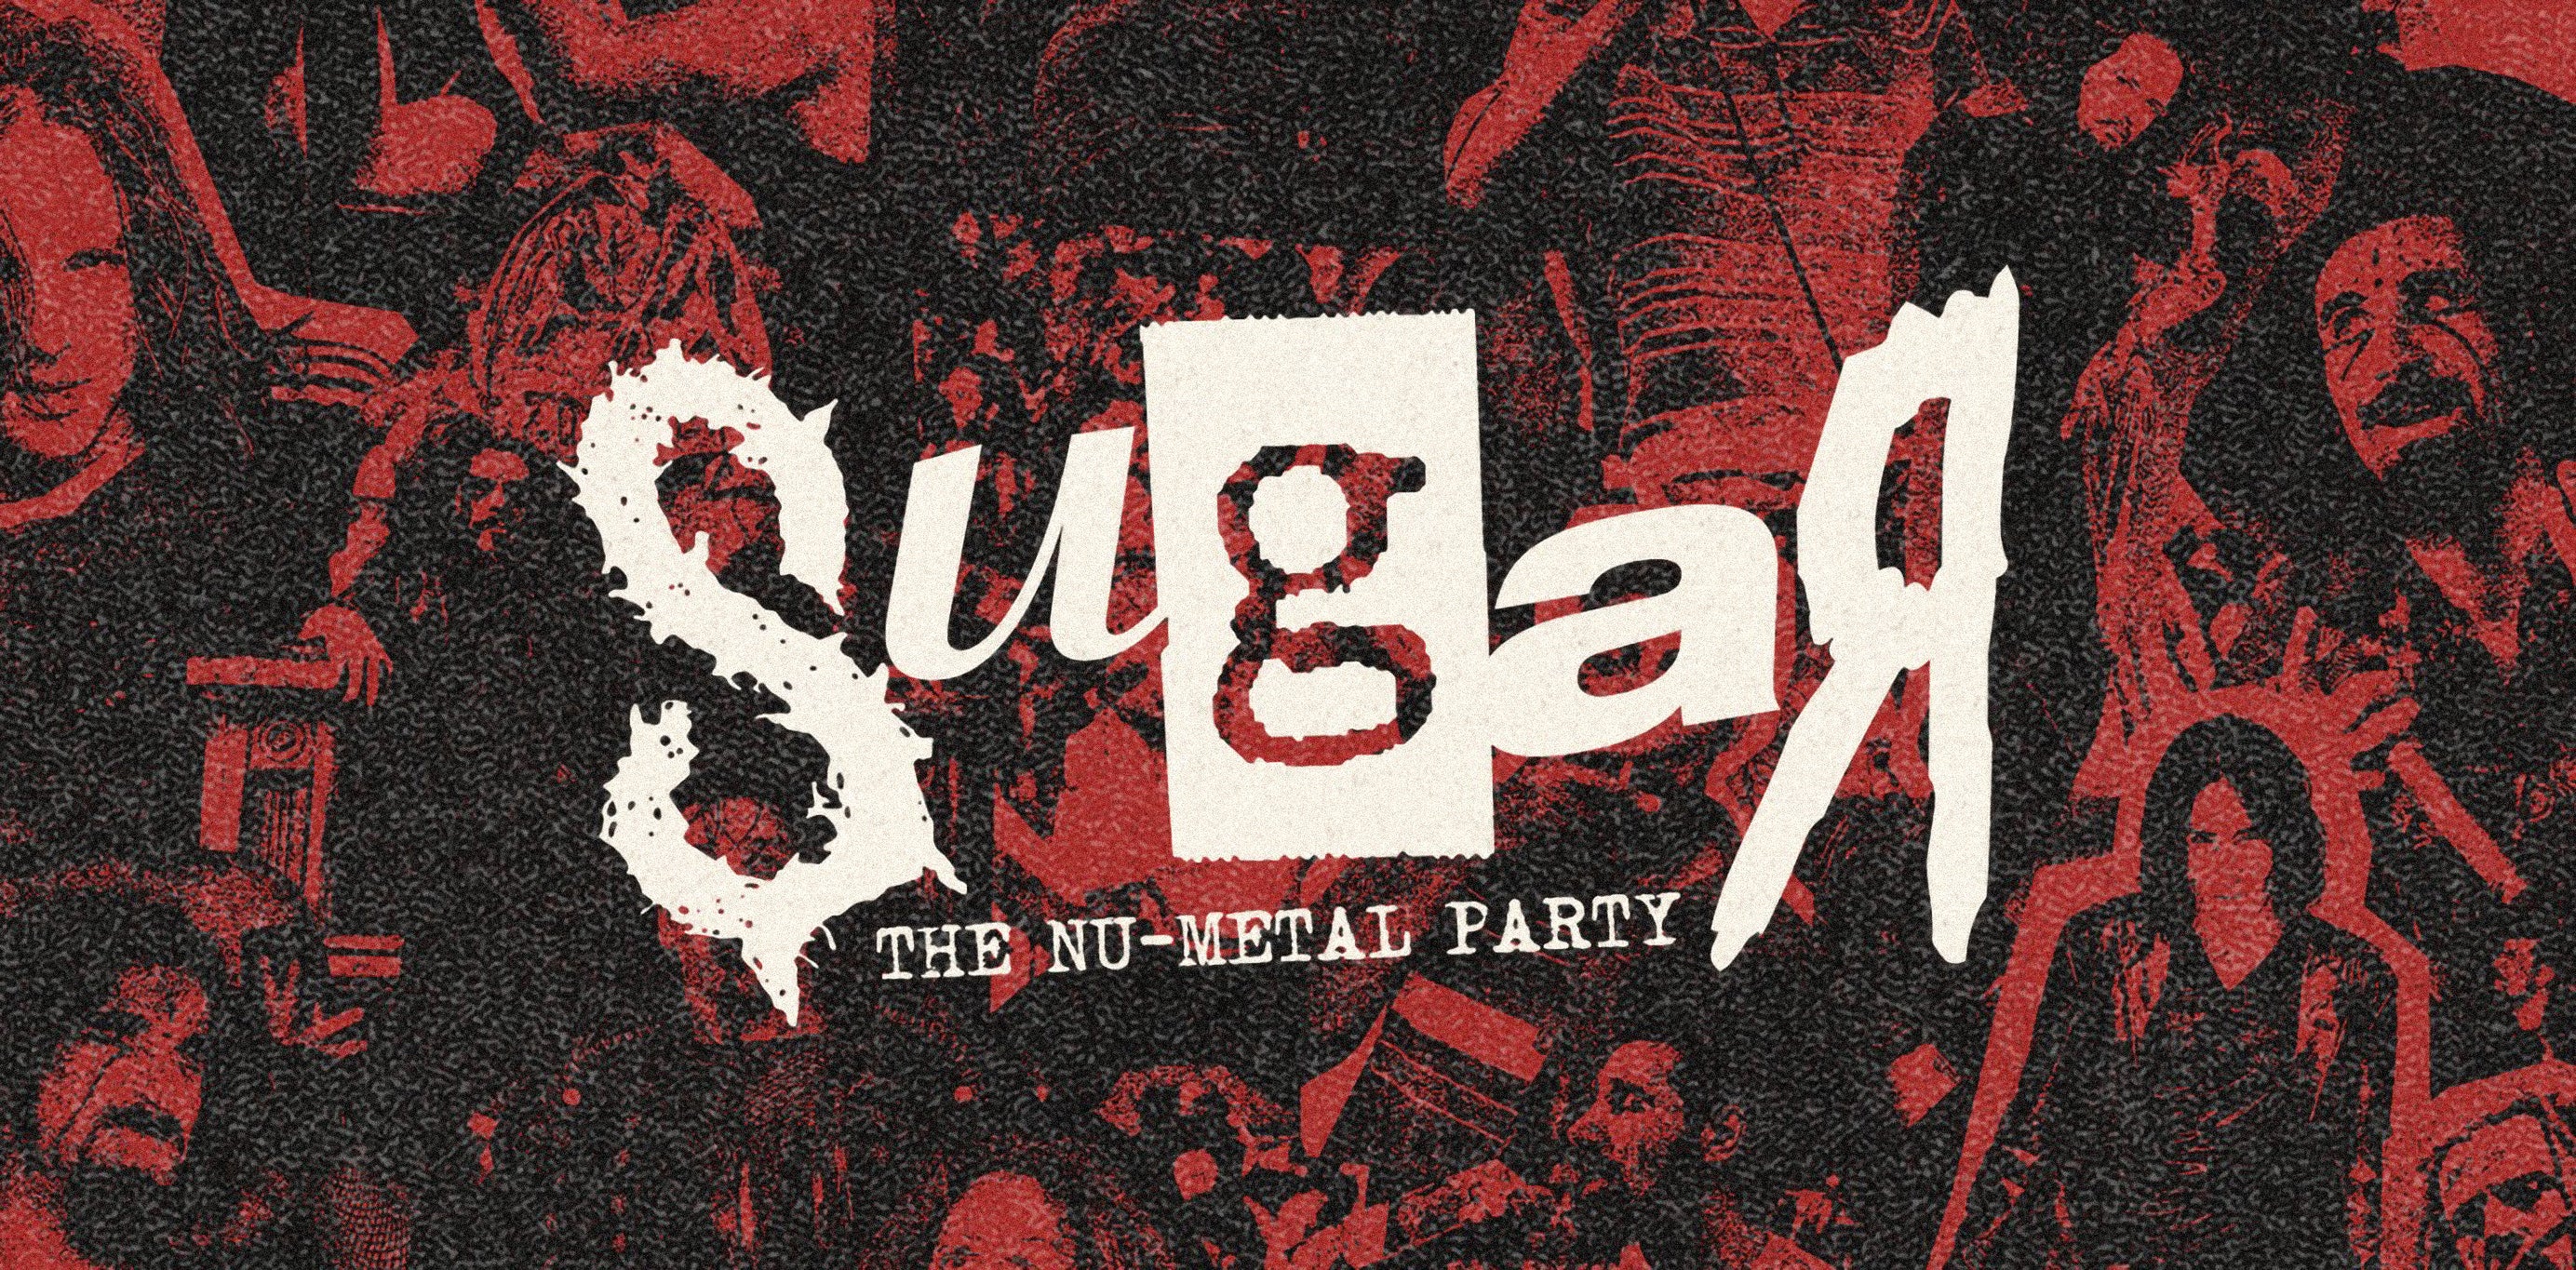 Sugar: The Nu-Metal Party - [18+] at Ace of Spades